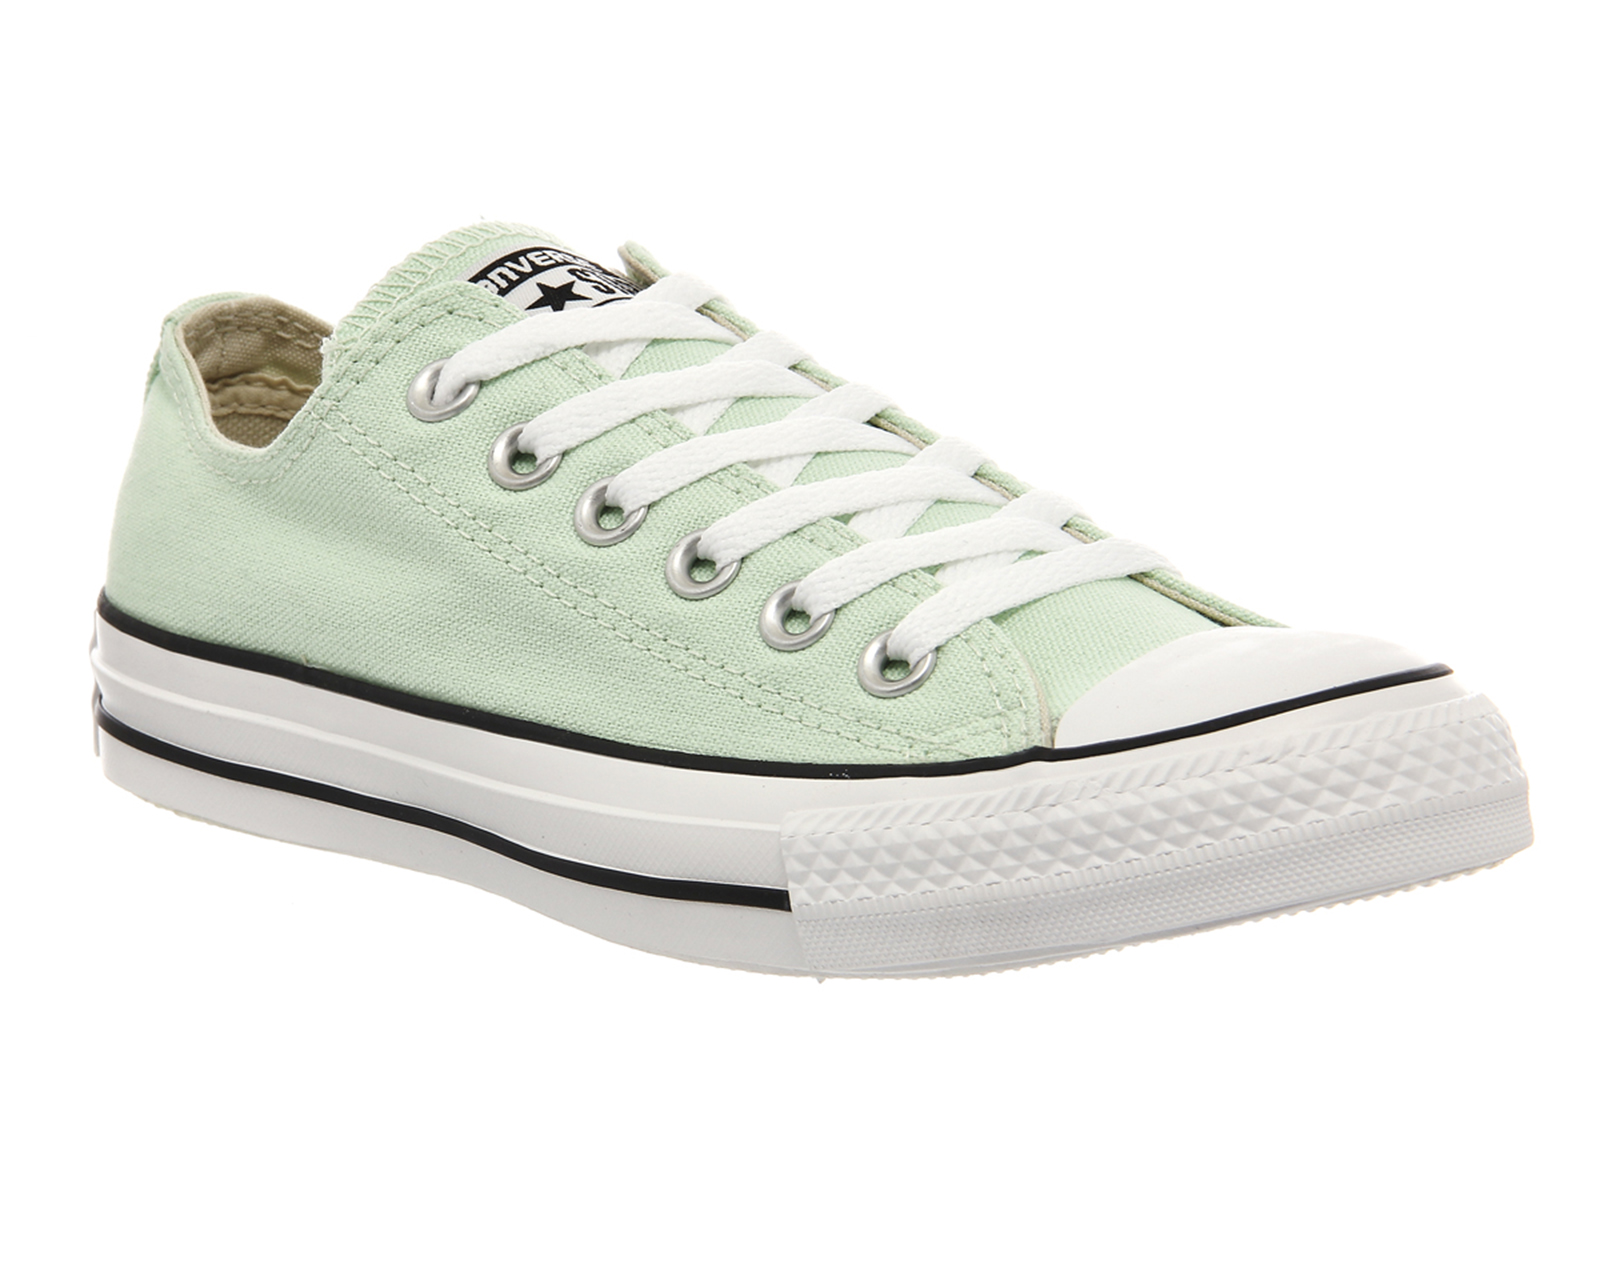 ConverseAll Star LowMint Julep Exclusive